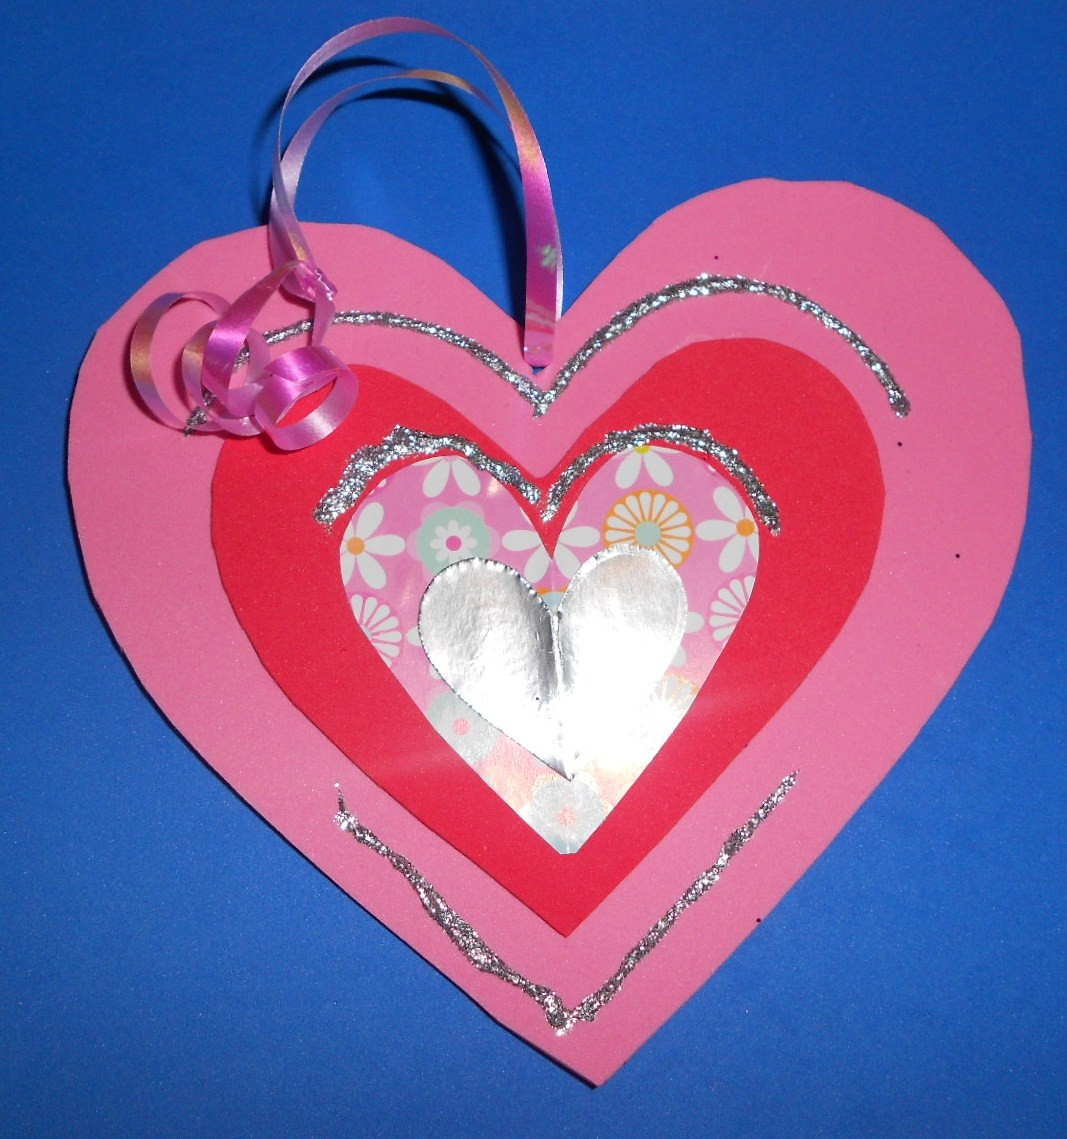 Preschool Arts And Crafts Ideas
 James&May Arts and Crafts Blog Love Heart Crafts for Children